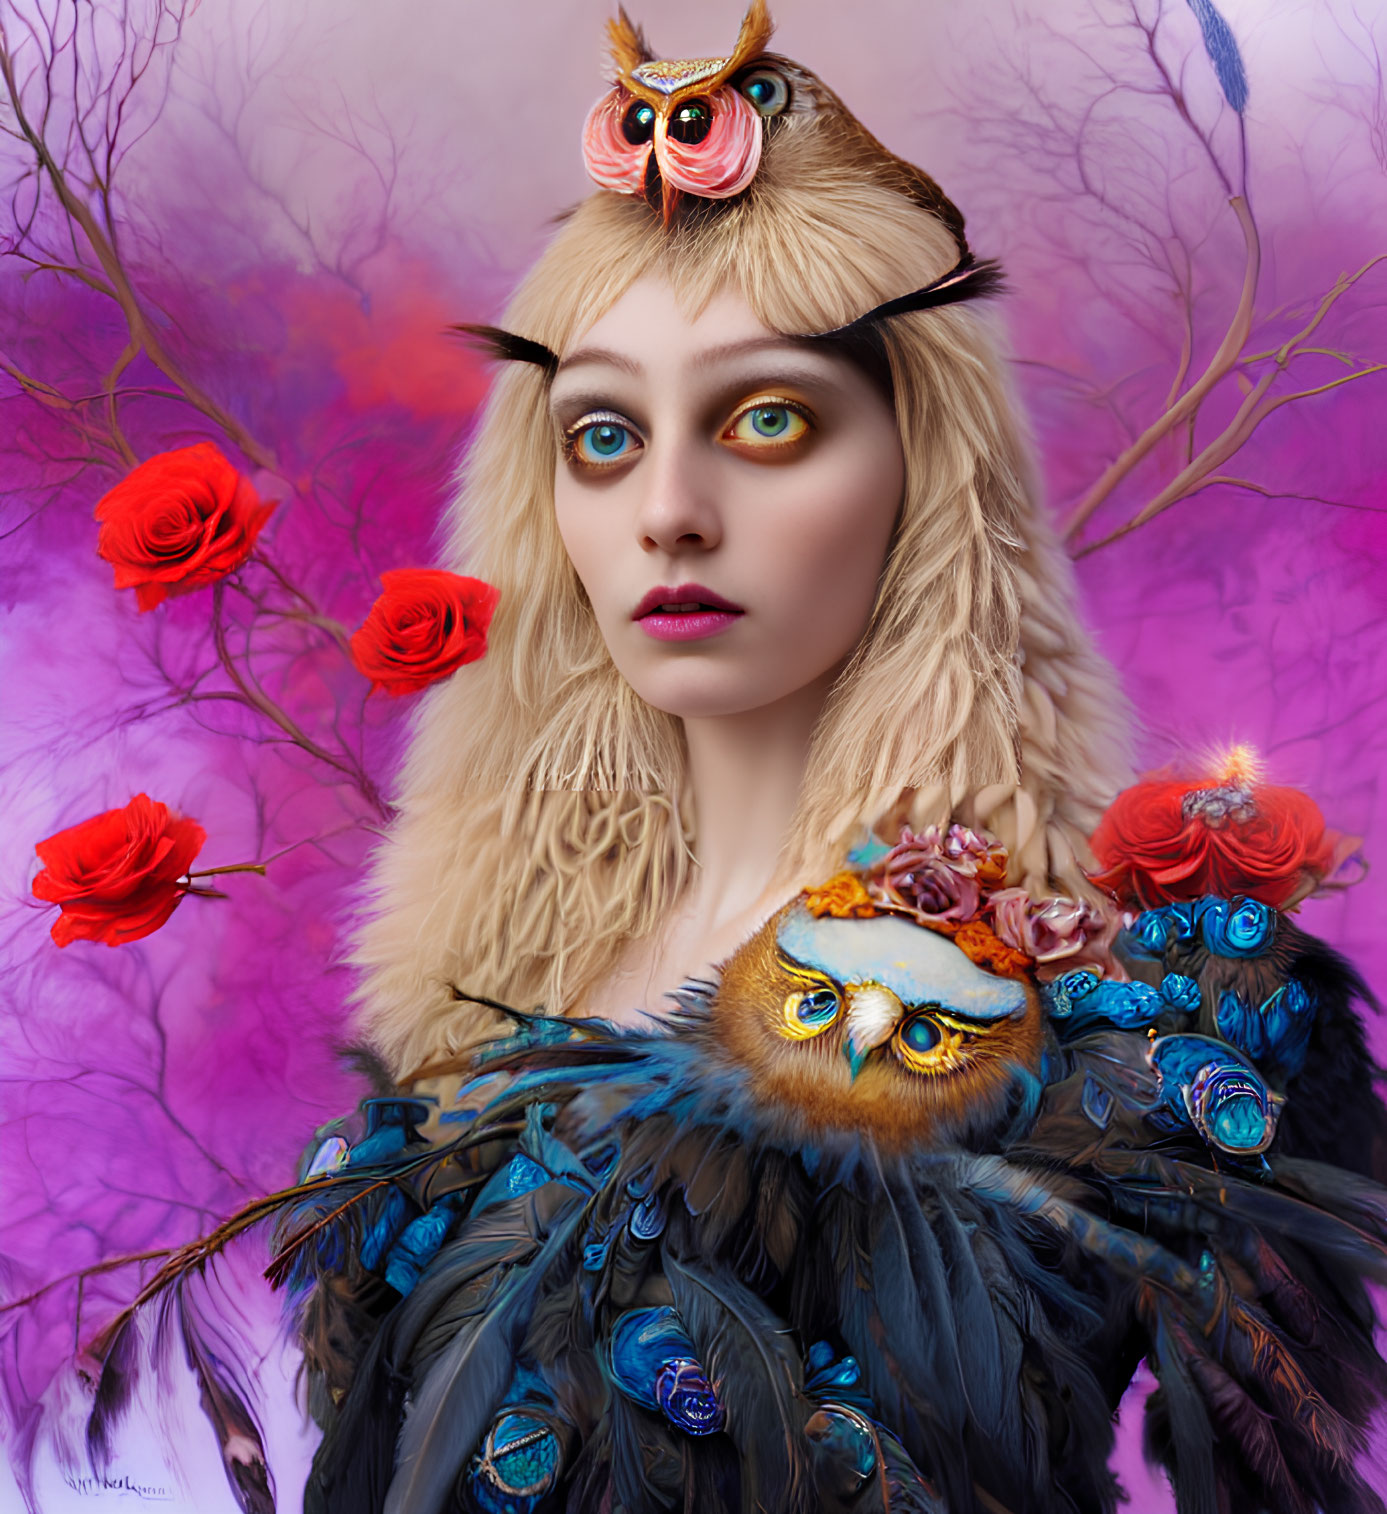 Surreal portrait: woman with owls, red roses, purple backdrop